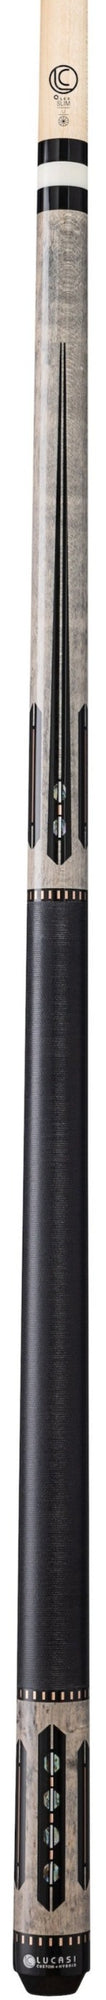 Lucasi Lucasi LUX69 Limited Edition Hybrid Pool Cue Pool Cue